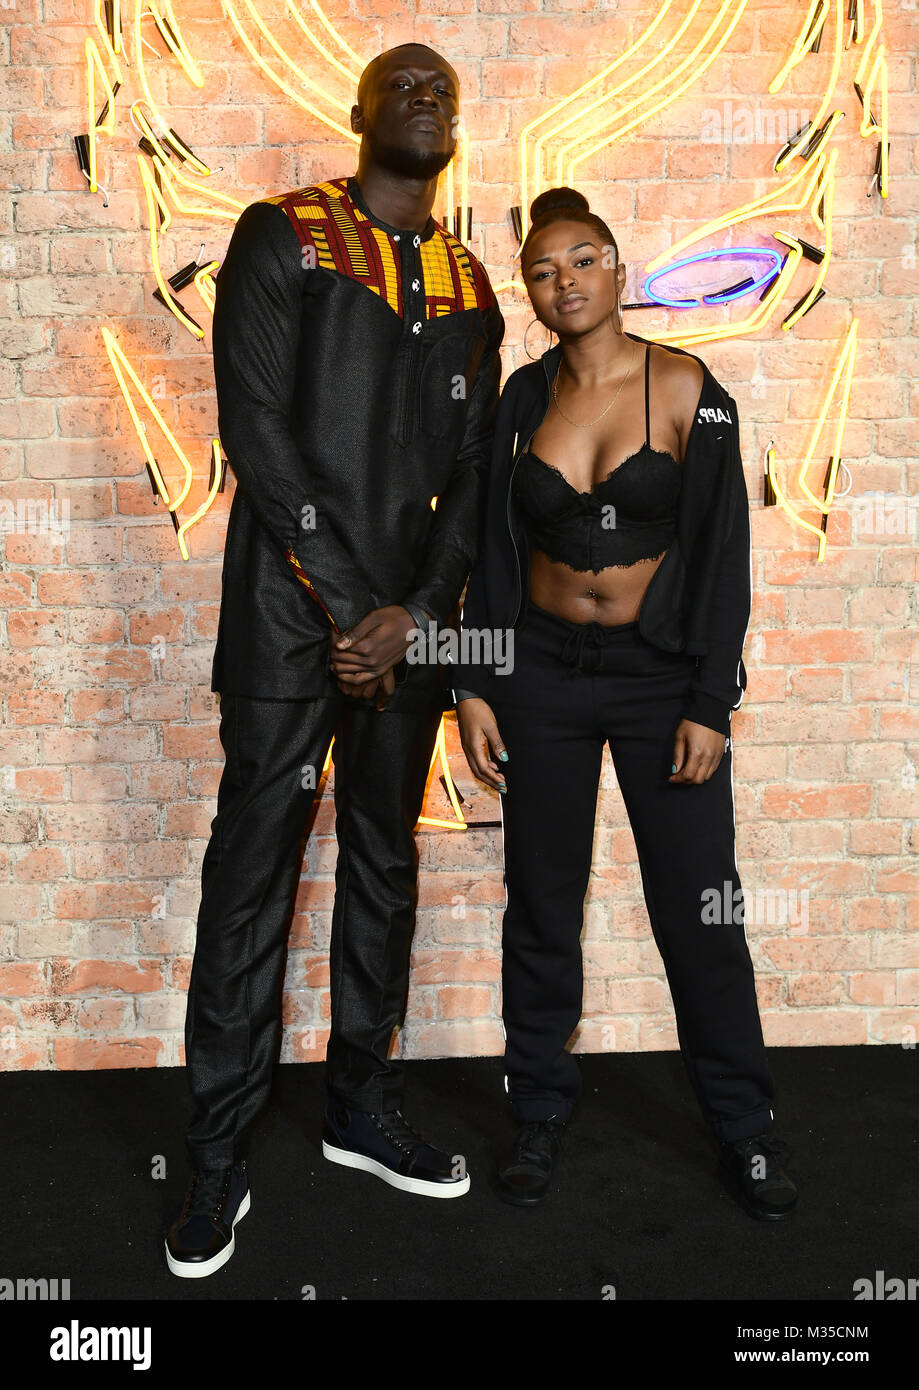 Stormzy and Nadia Rose attending The Black Panther European Premiere at The  Eventim Apollo Hammersmith London. PRESS ASSOCIATION Photo. Picture date:  Thursday February 8, 2018. See PA story SHOWBIZ Panther. Photo credit